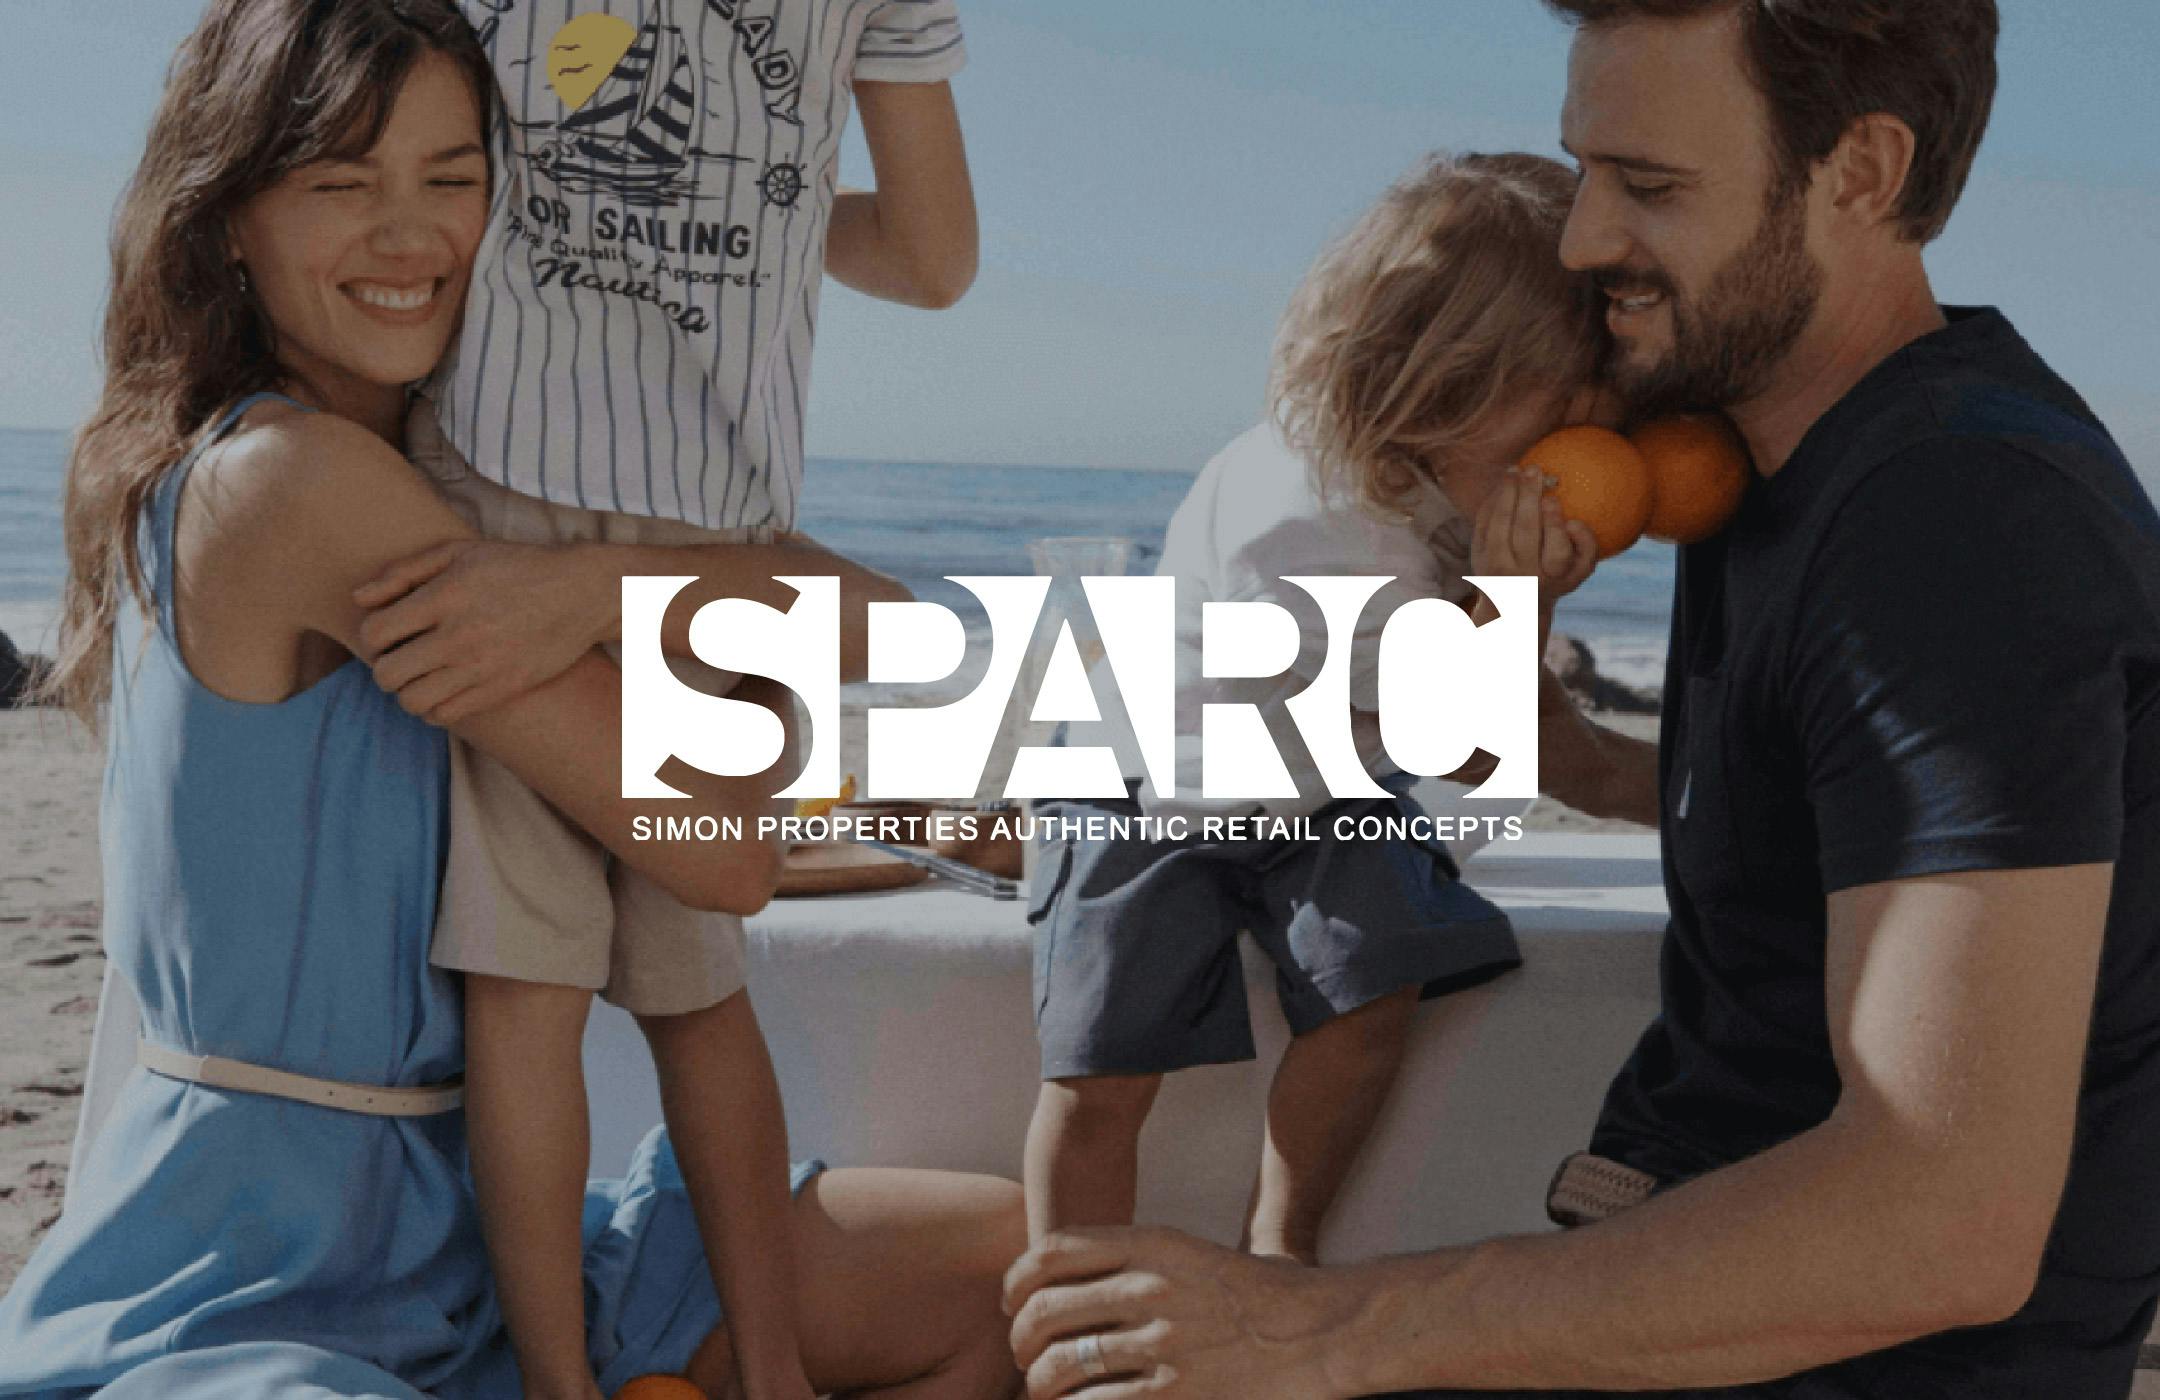 Photo of a woman hugging a child tightly and a man playing with another child, overlaid with the SPARC logo